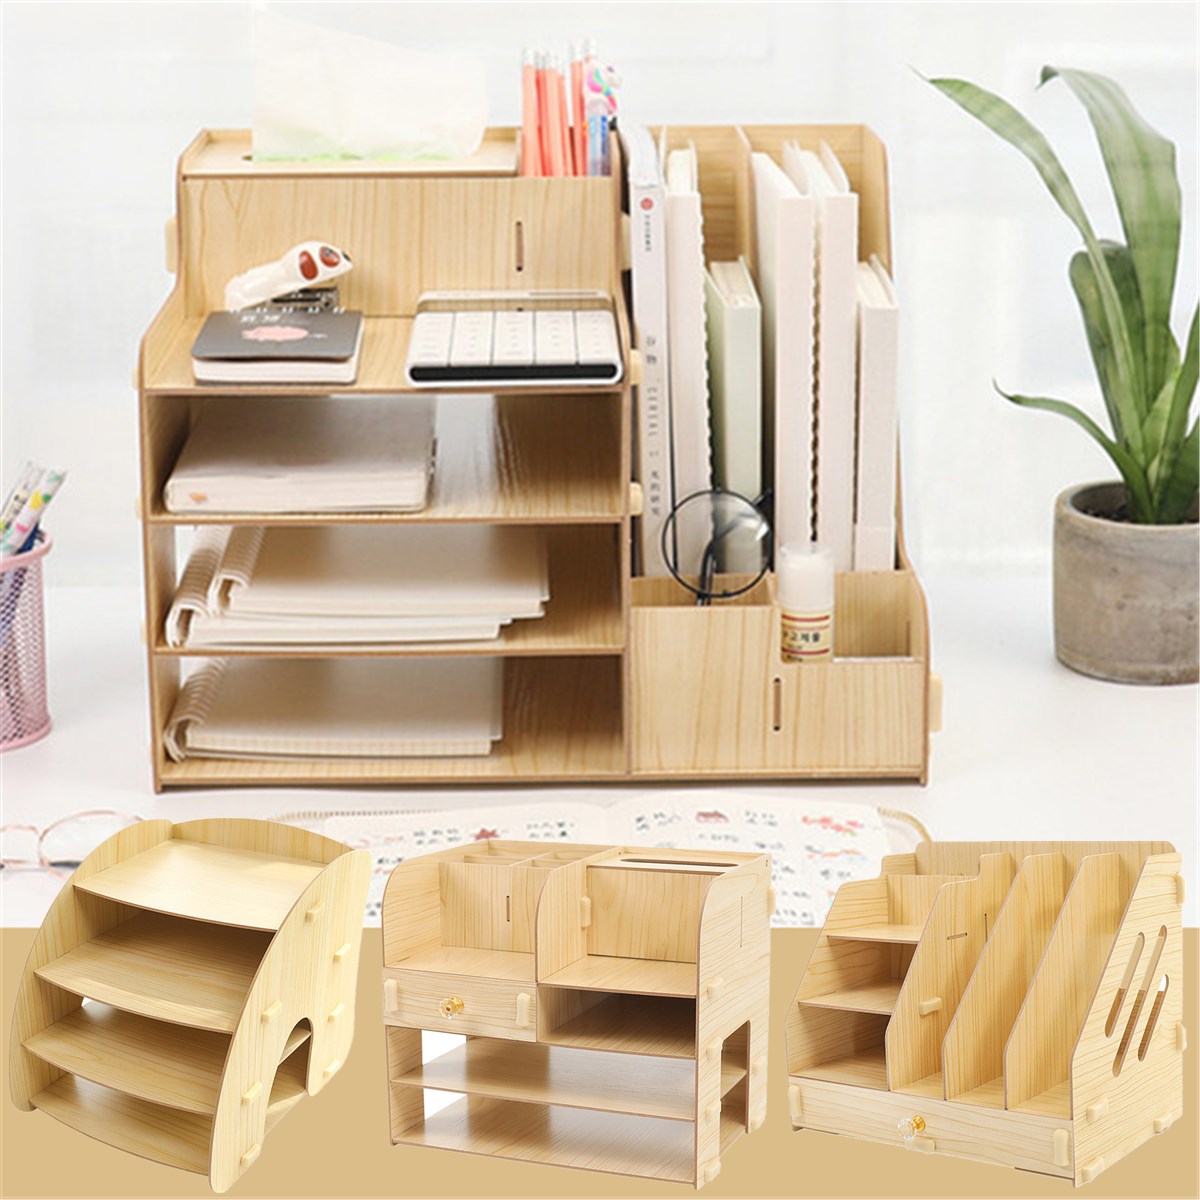 Stationery-Container-Desktop-Drawer-Organizer-Desktop-Storage-Box-Brush-Container-Office-Pencil-Hold-1603946-7